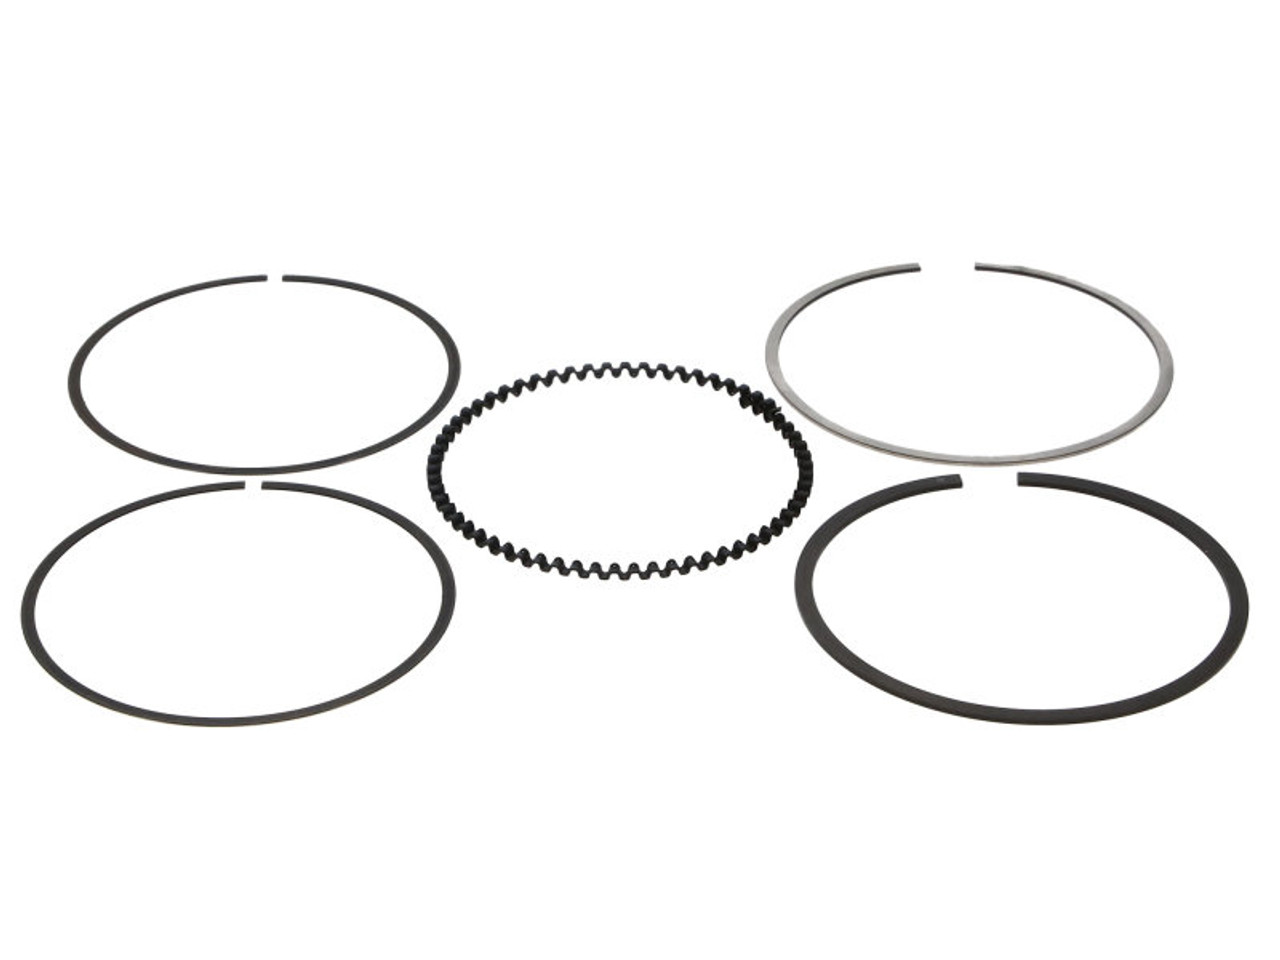 Wiseco 99.75mm (3.927in) Ring Set 1.2 x 1.5 x 2.0mm Ring Shelf Stock - 9975VF Photo - Primary